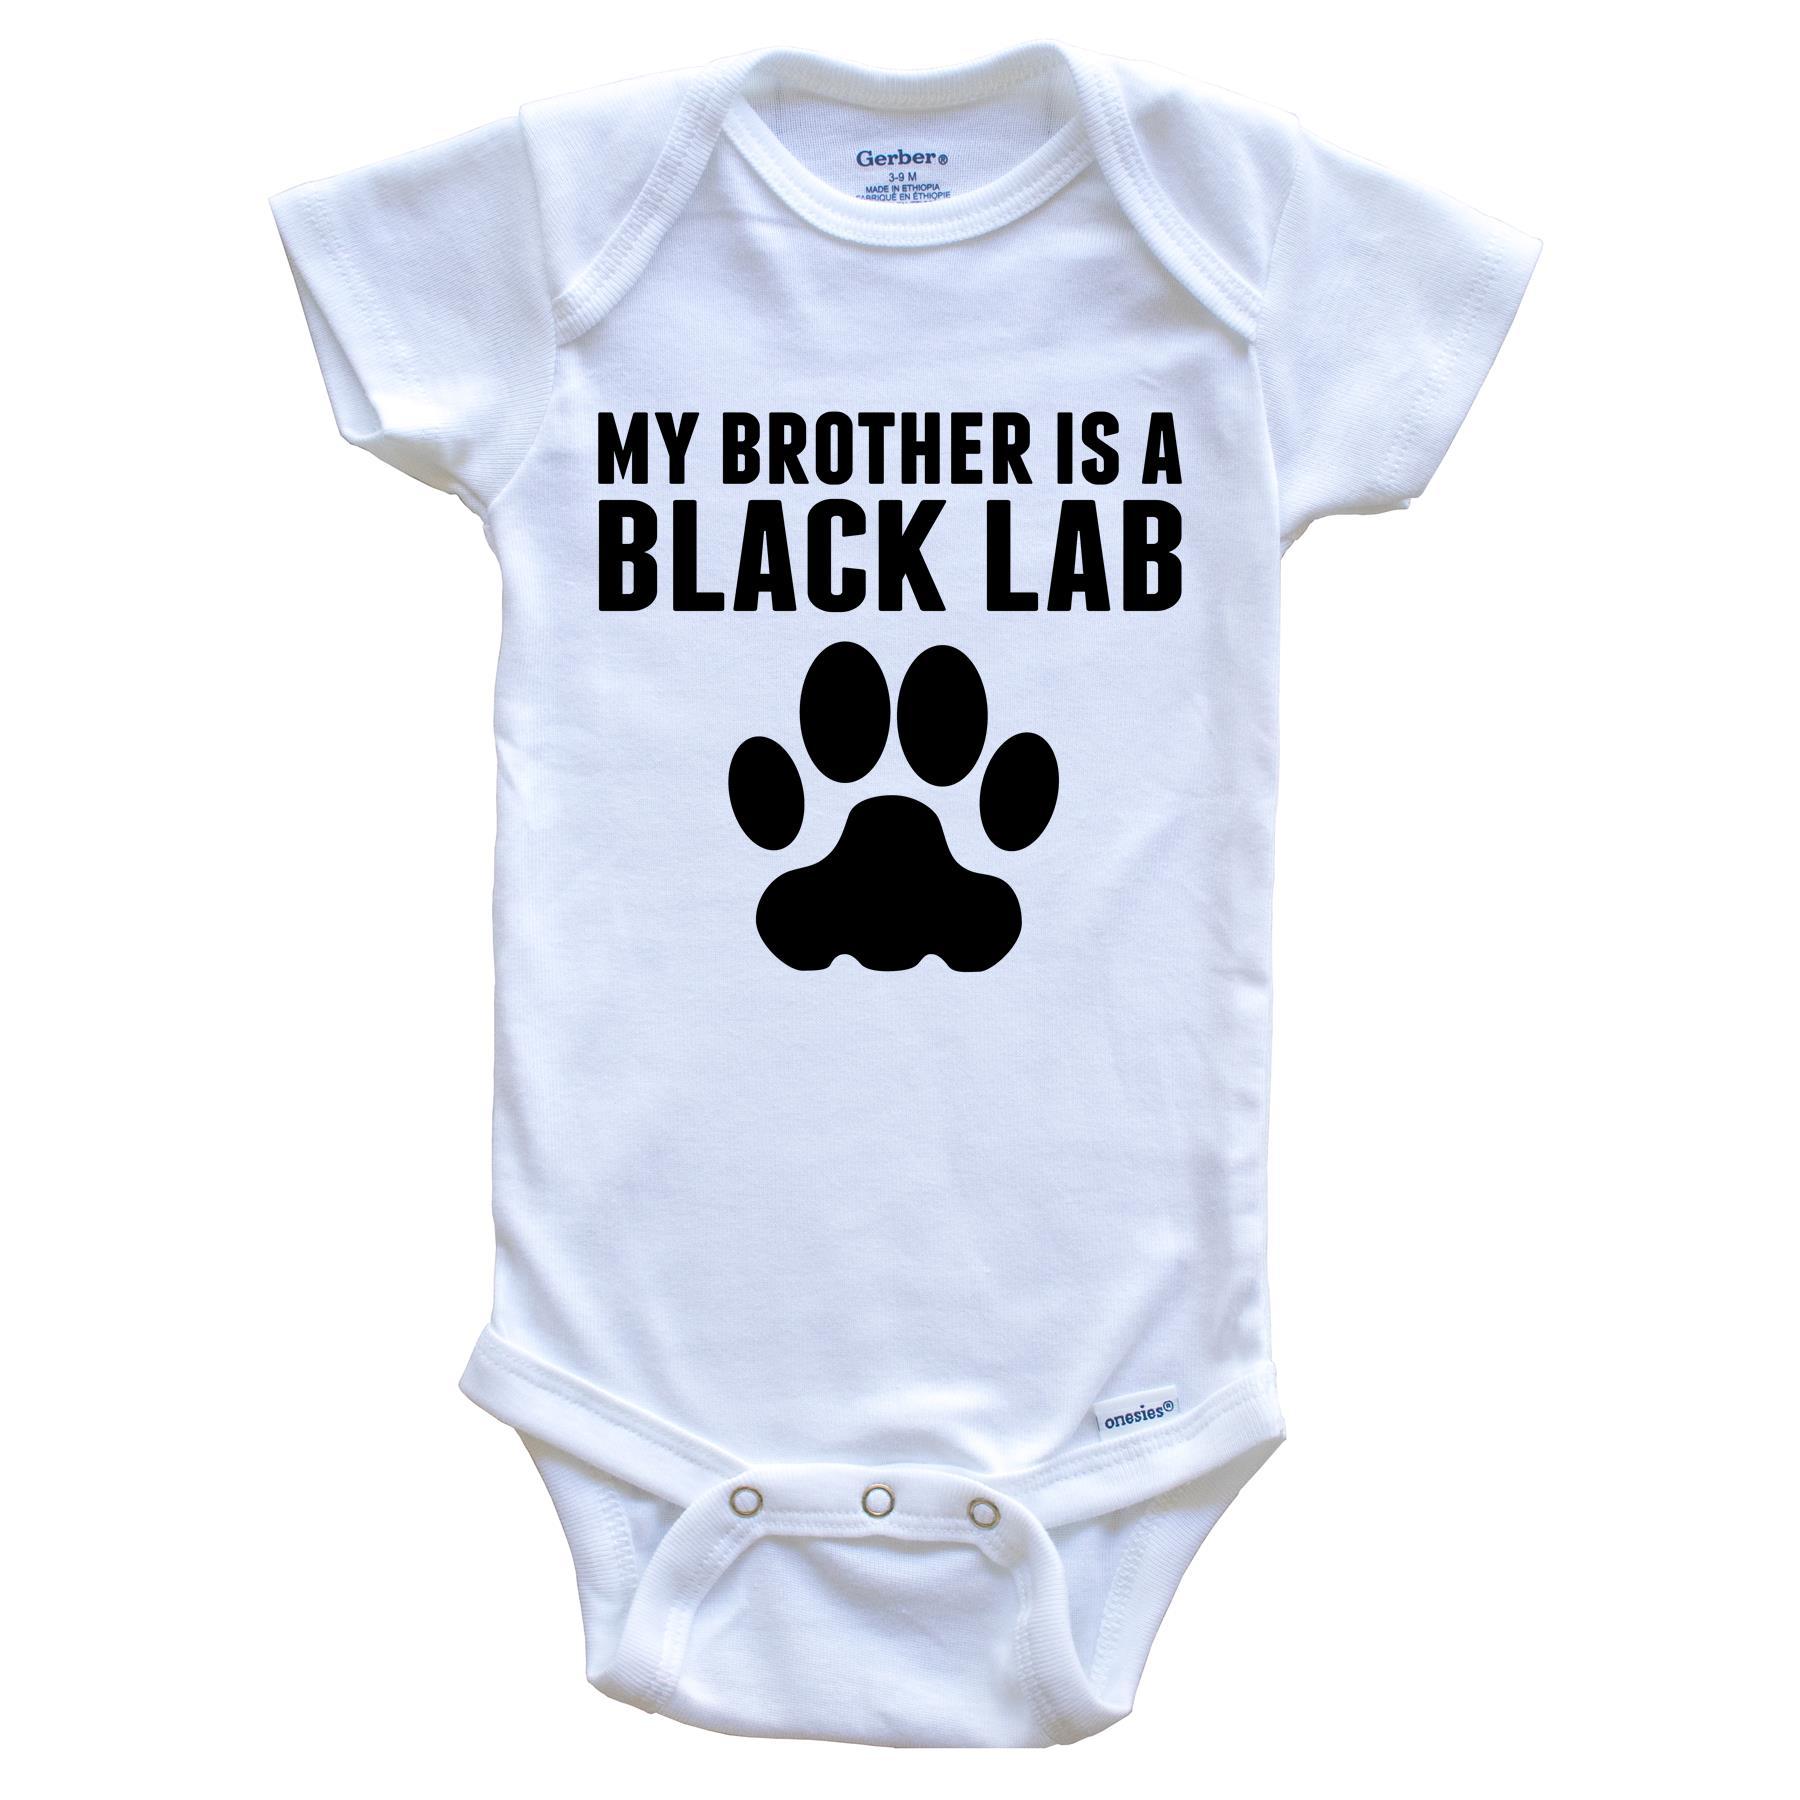 My Brother Is A Black Lab Baby Onesie